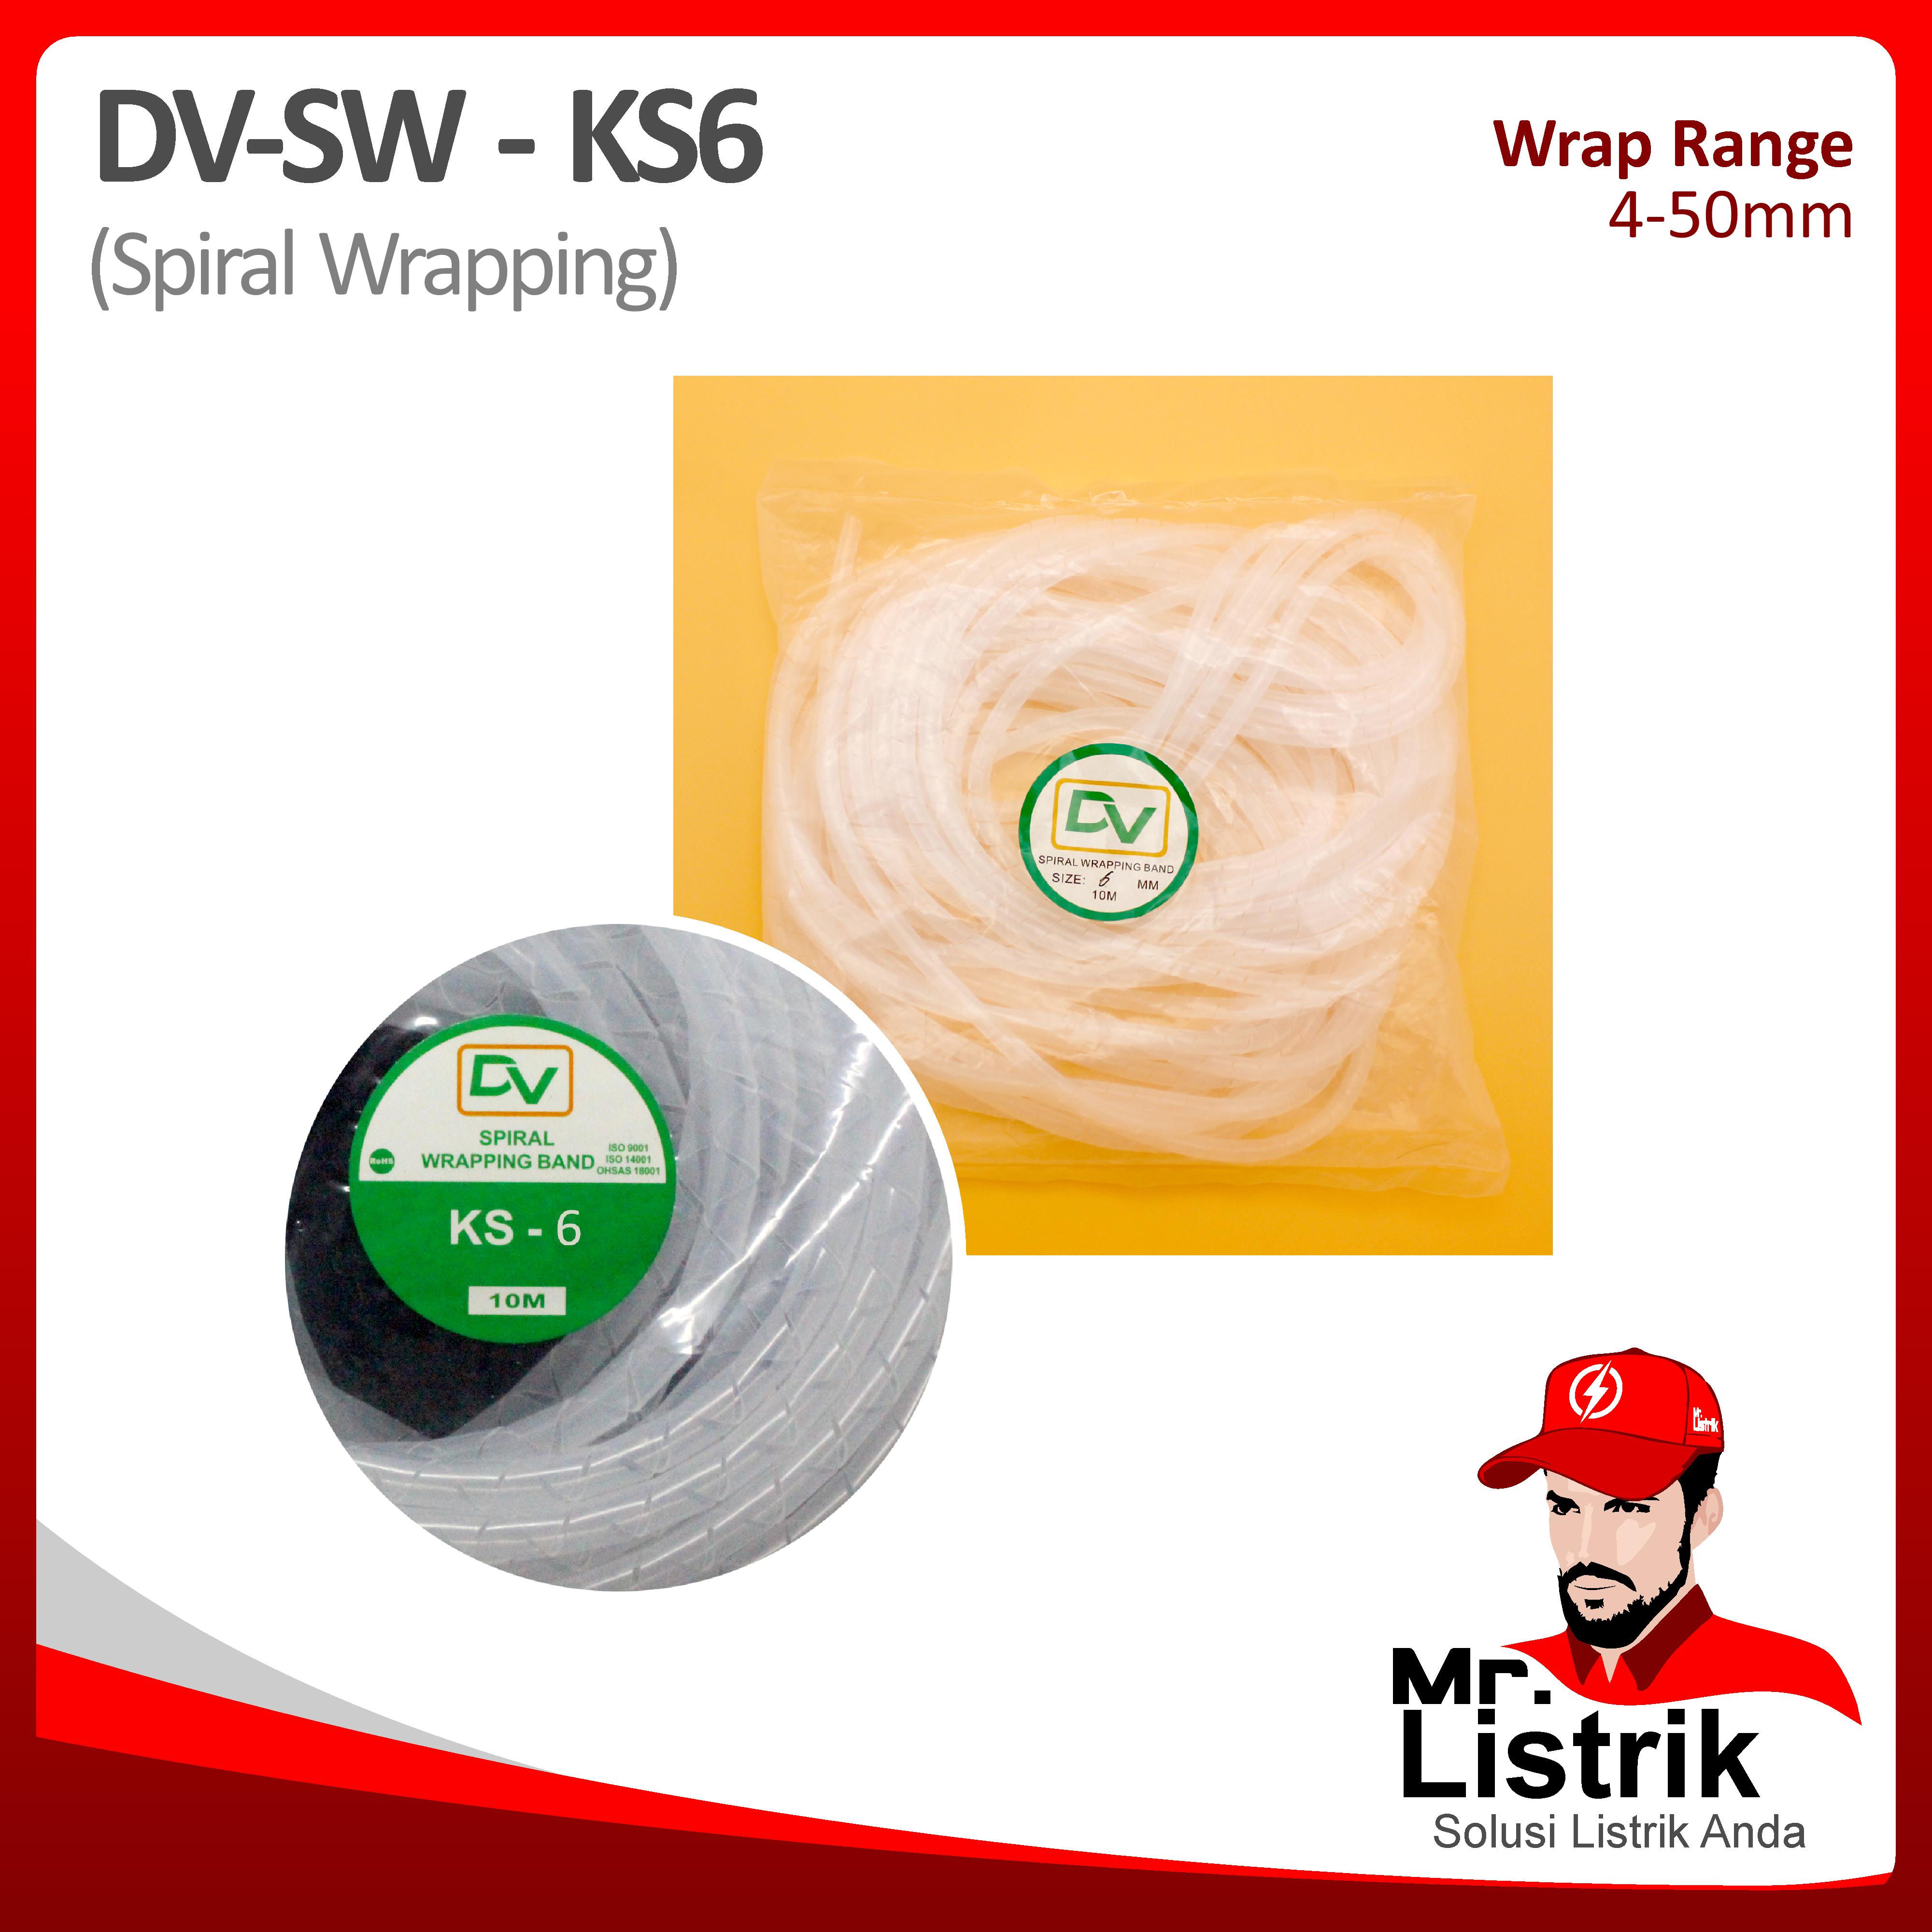 Spiral Wrapping 6mm DV SW KS6